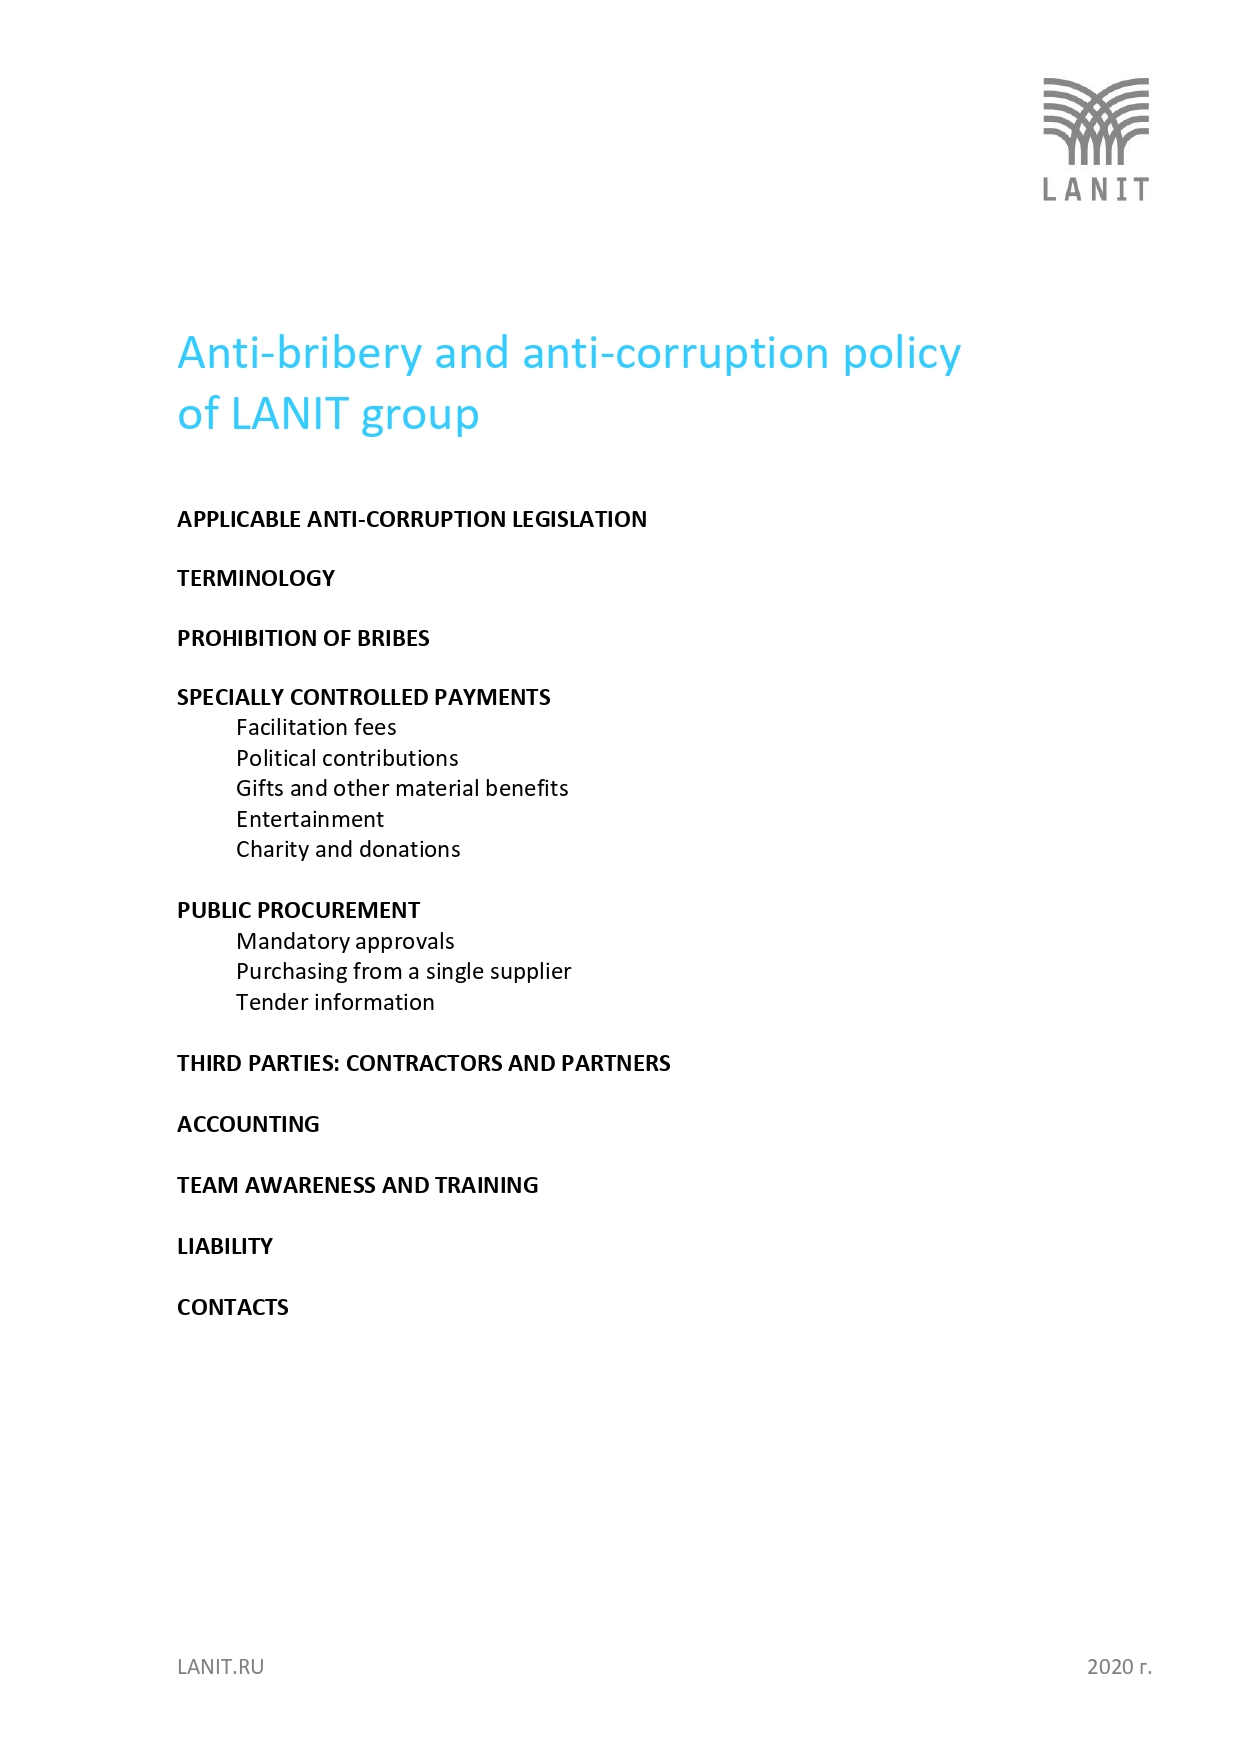 ANTI-BRIBERY AND ANTI-CORRUPTION POLICY OG LANIT GROUP